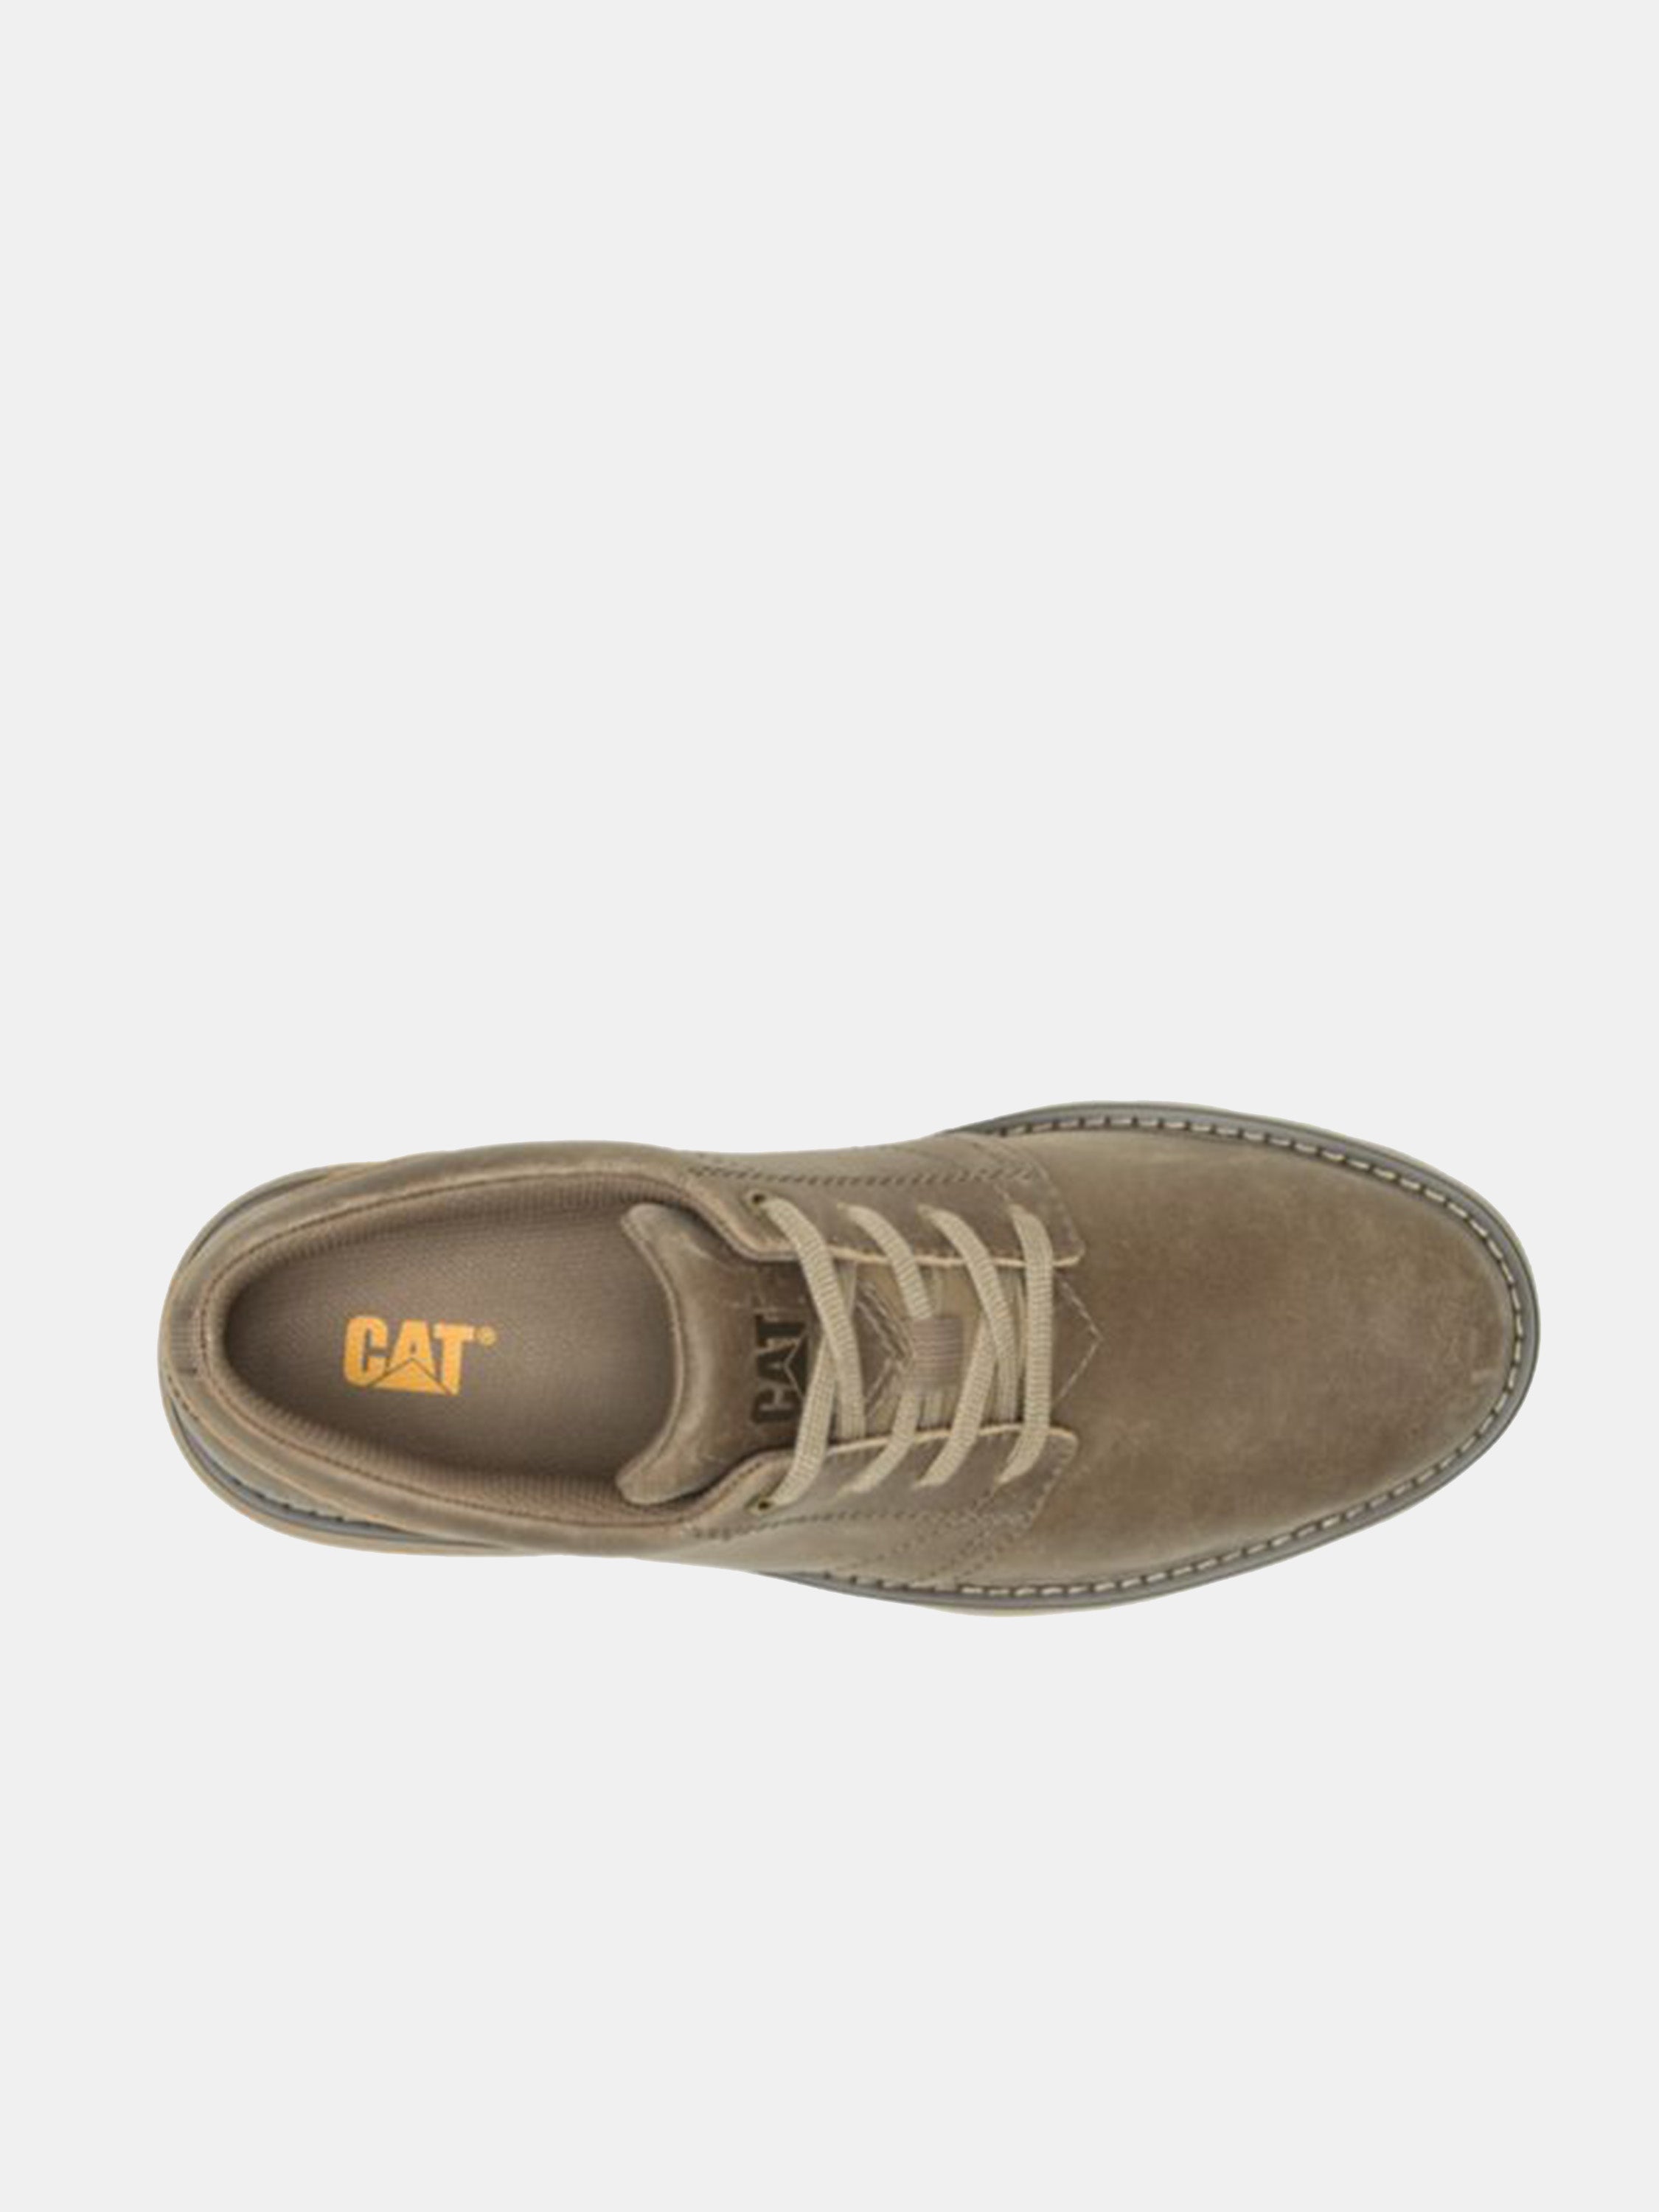 Caterpillar Men's Oly 2.0 Lace Up Shoes #color_Brown